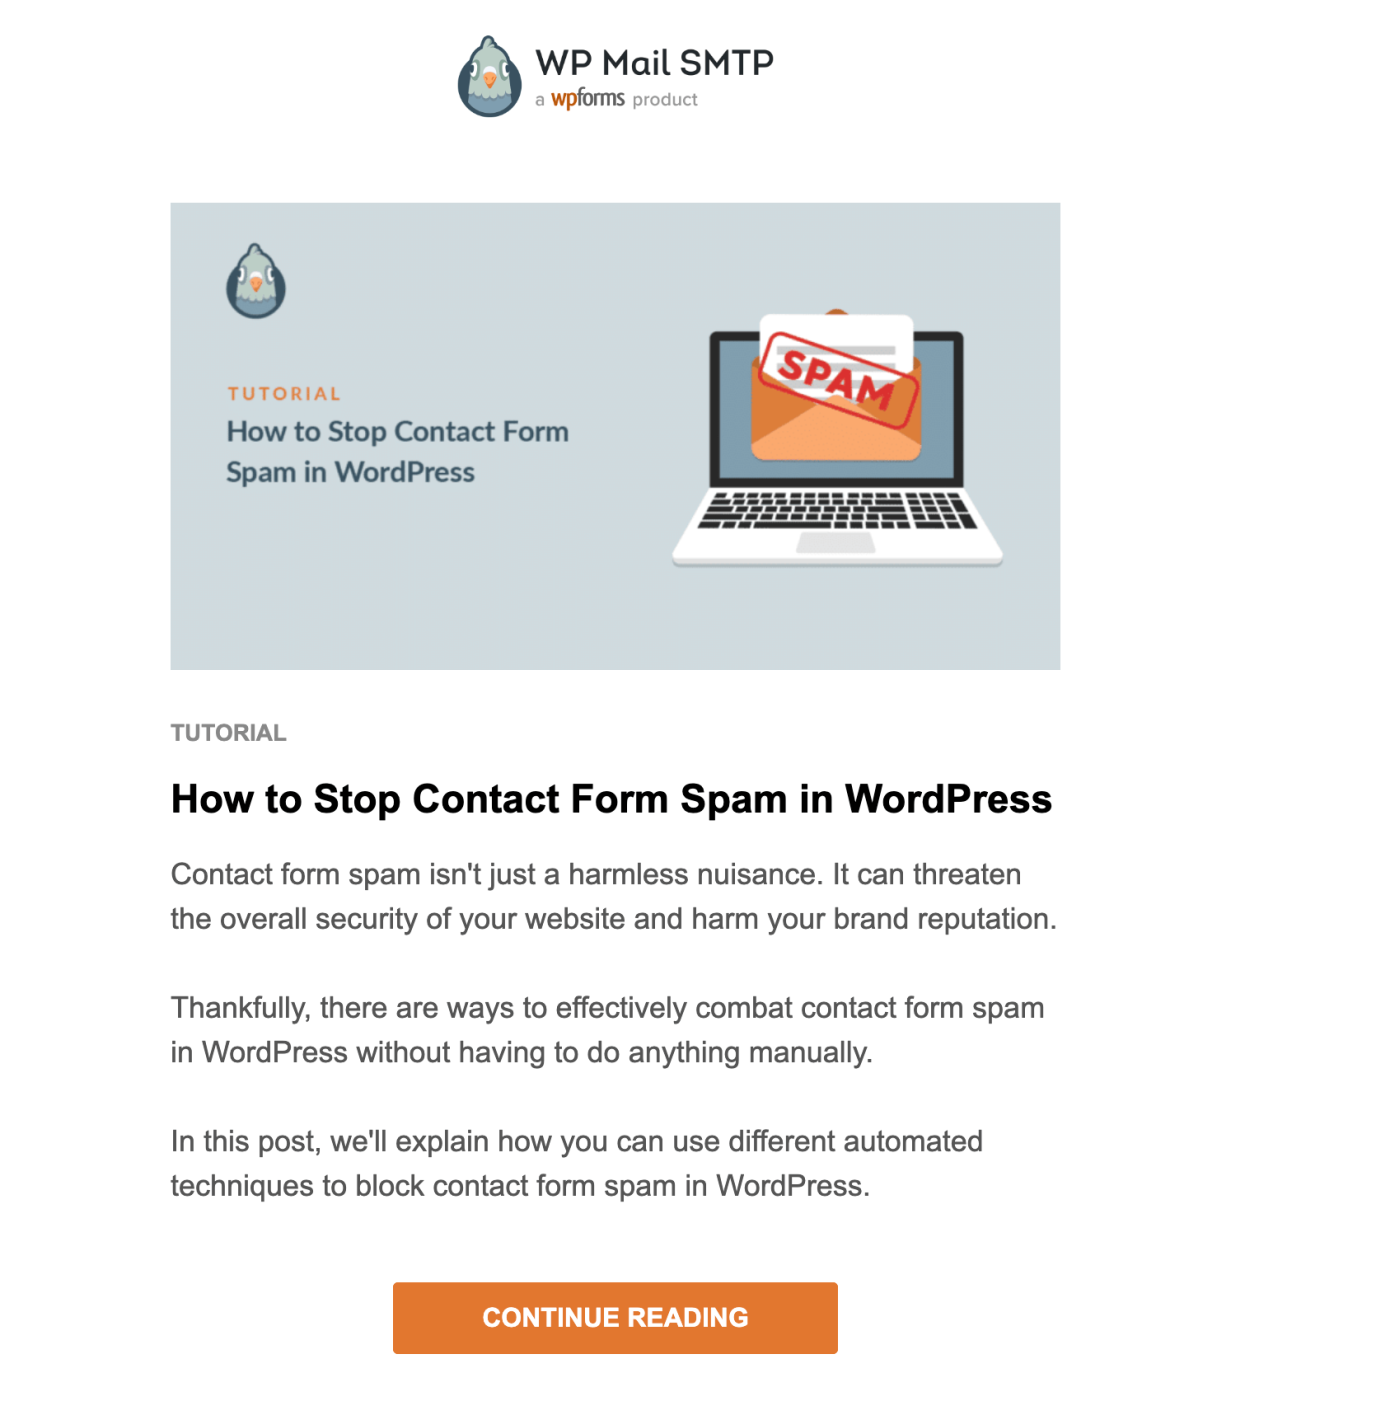 WP Mail SMTP helpful content